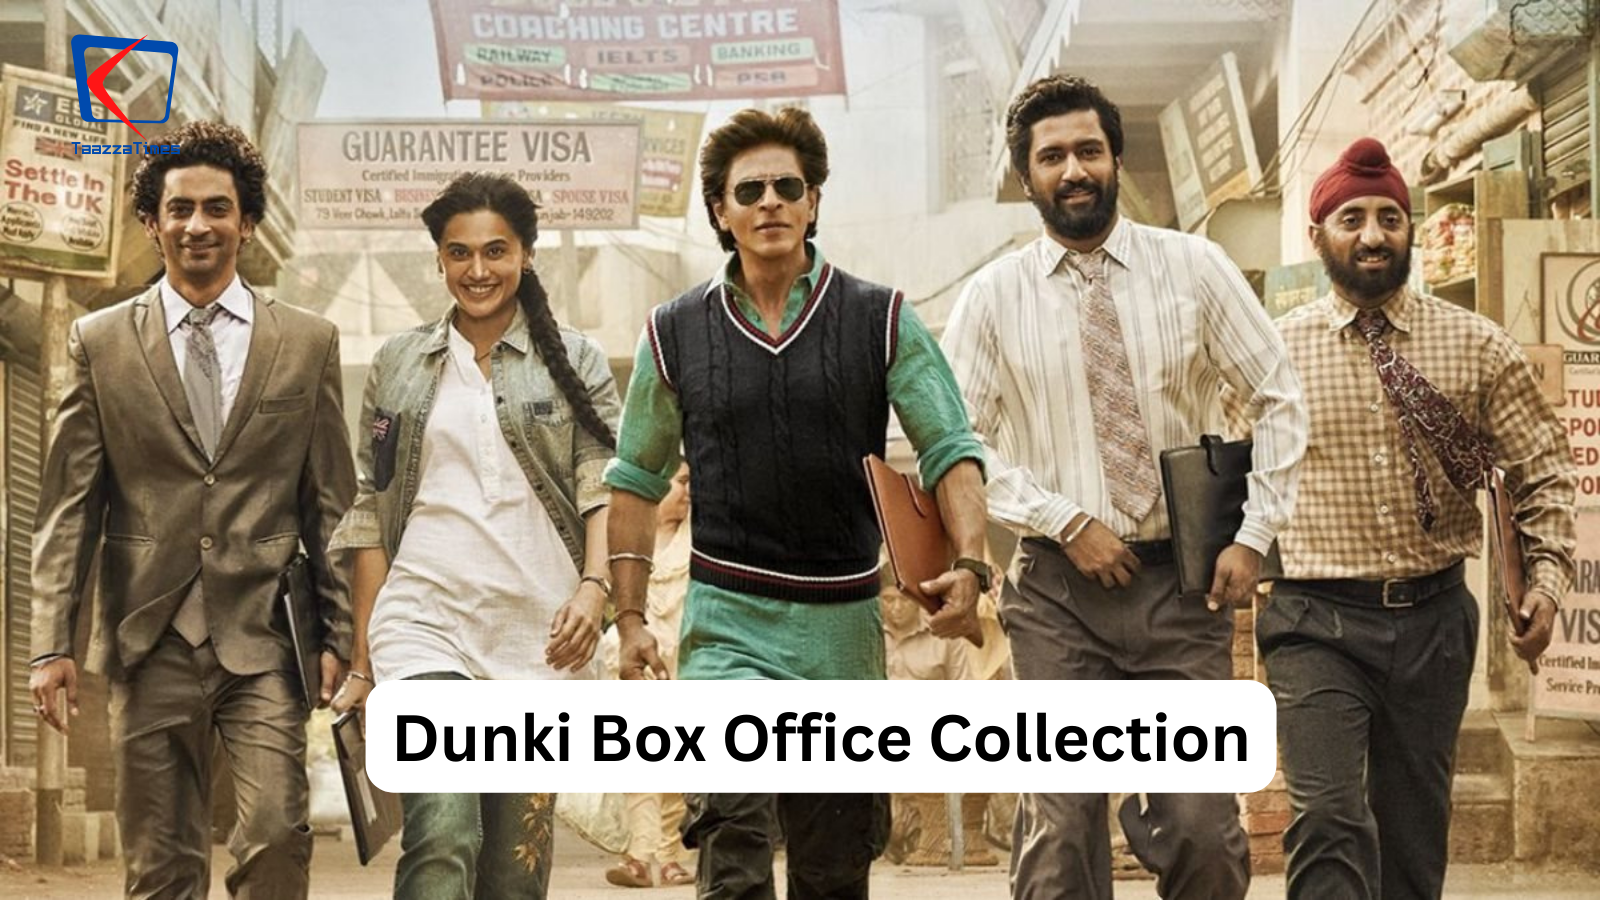 Dunki Box Office Collection